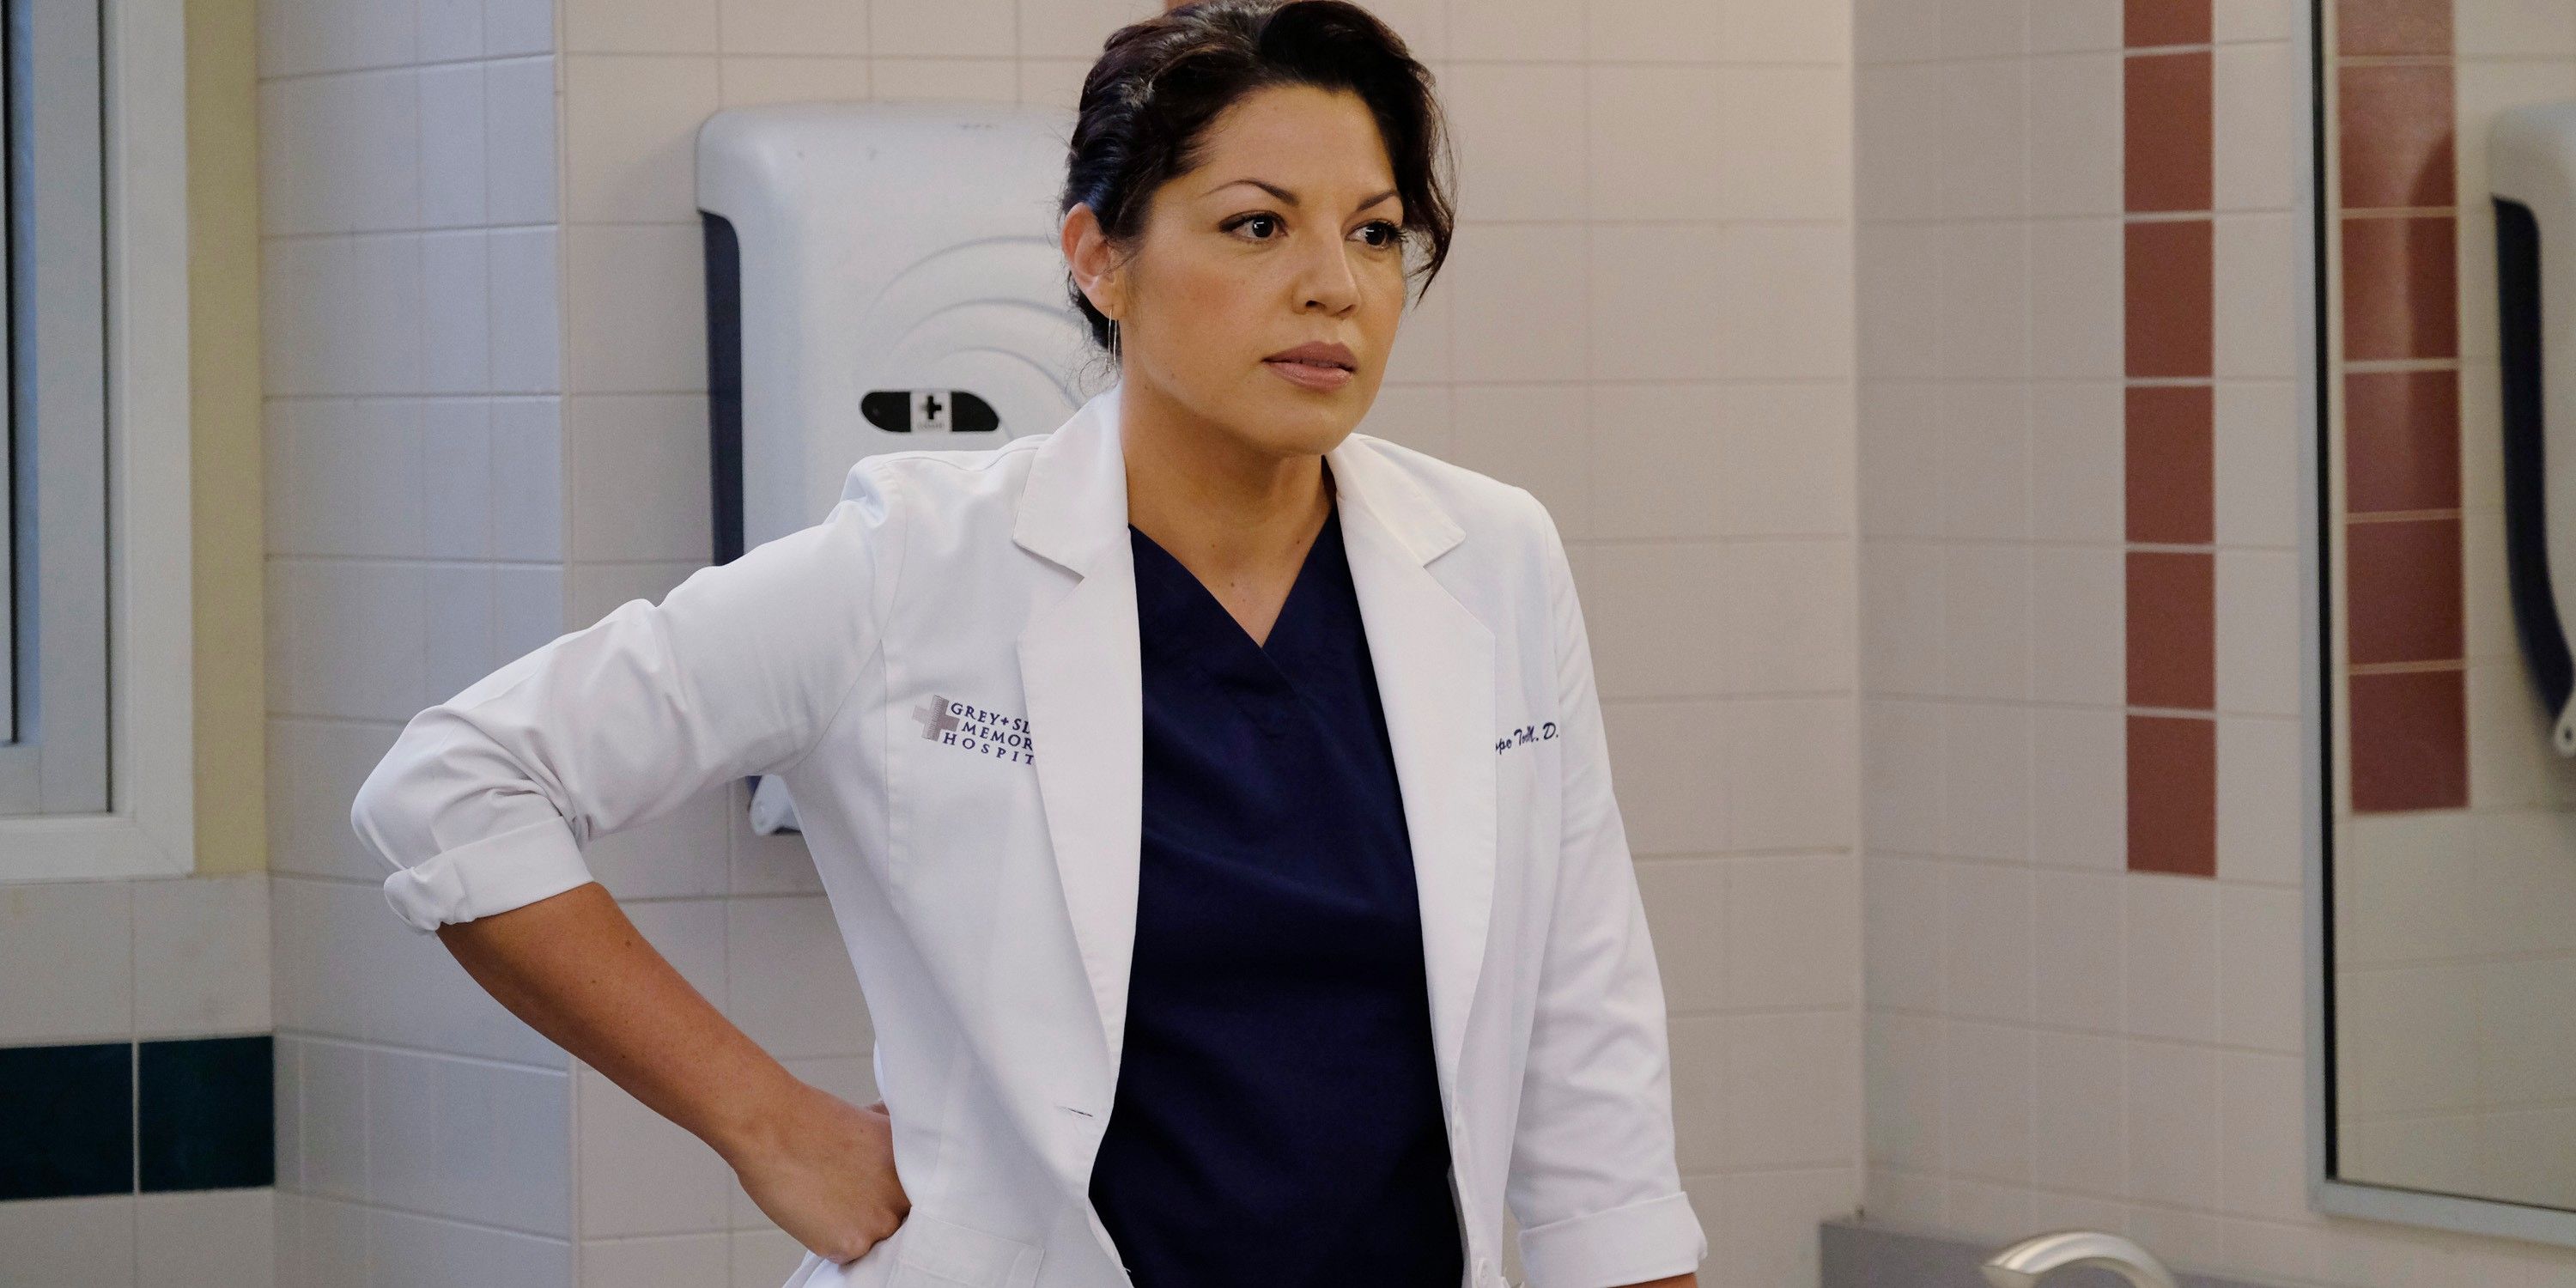 Callie Torres First George O Malley Last Thank you.